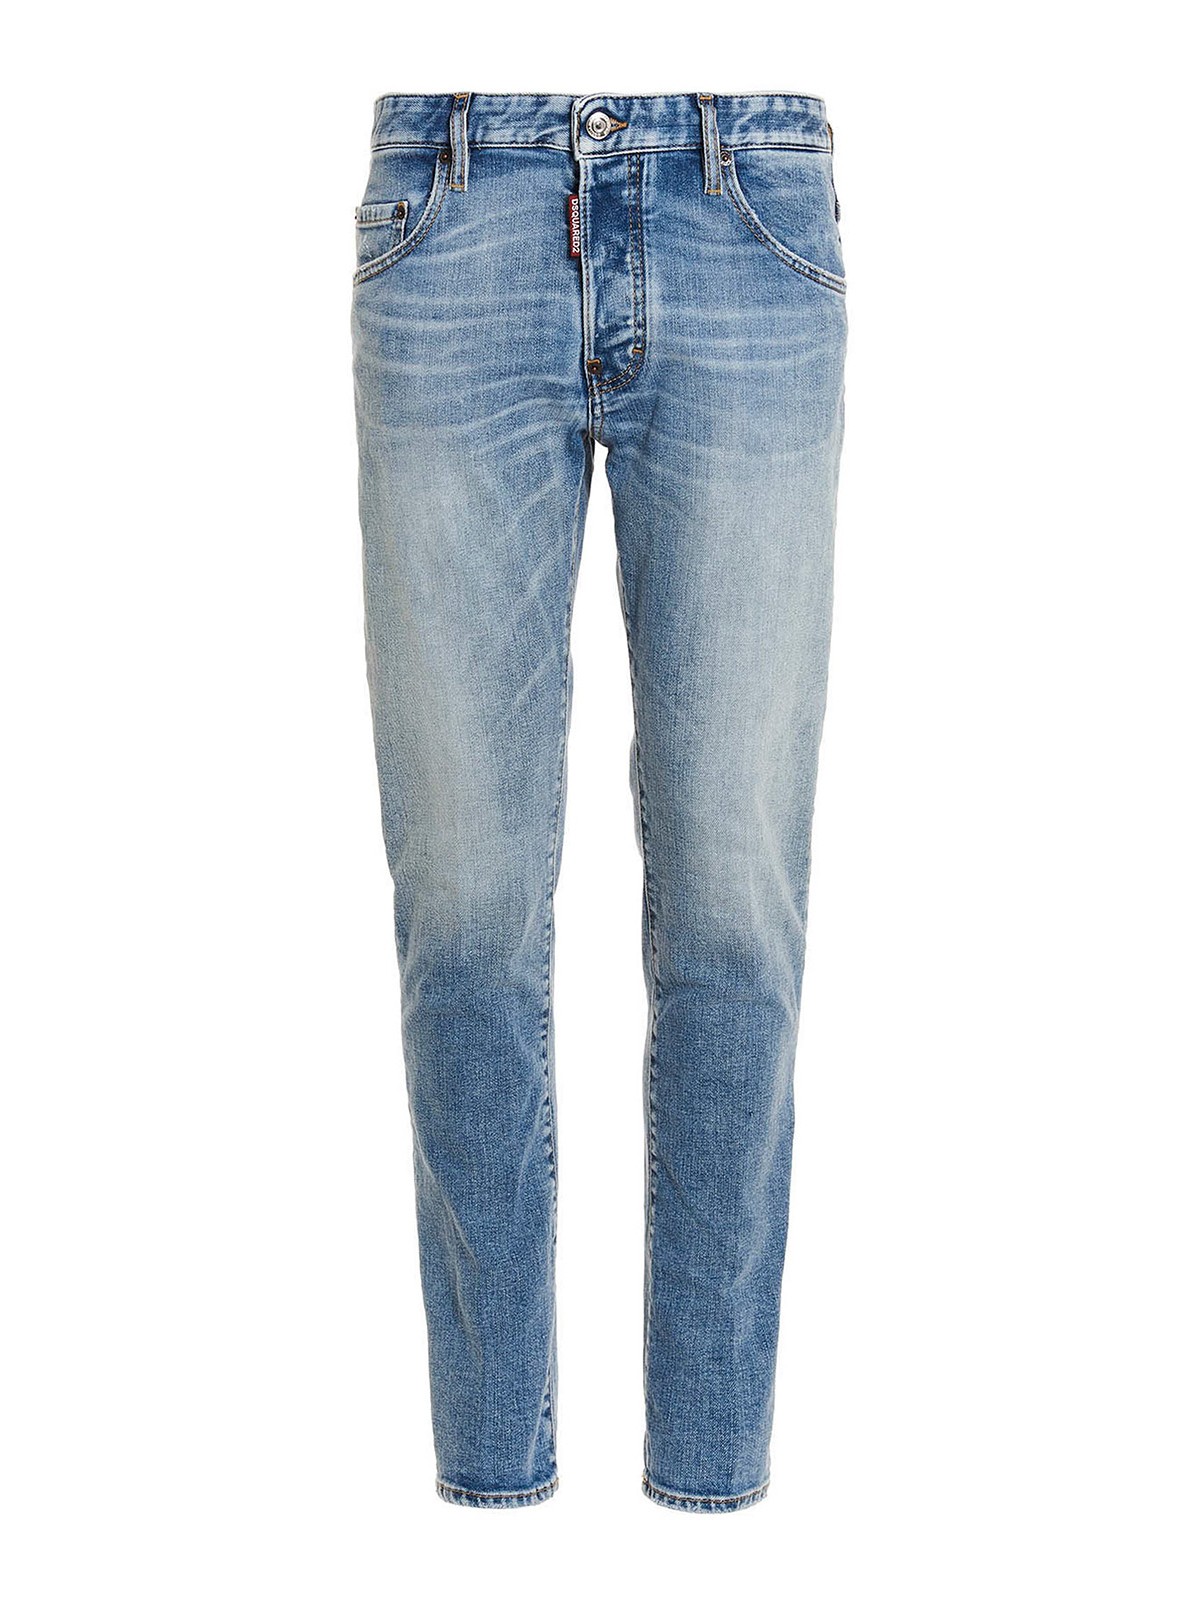 Dsquared2 Regular & Straight-Leg Jeans for Men - Shop Now on FARFETCH